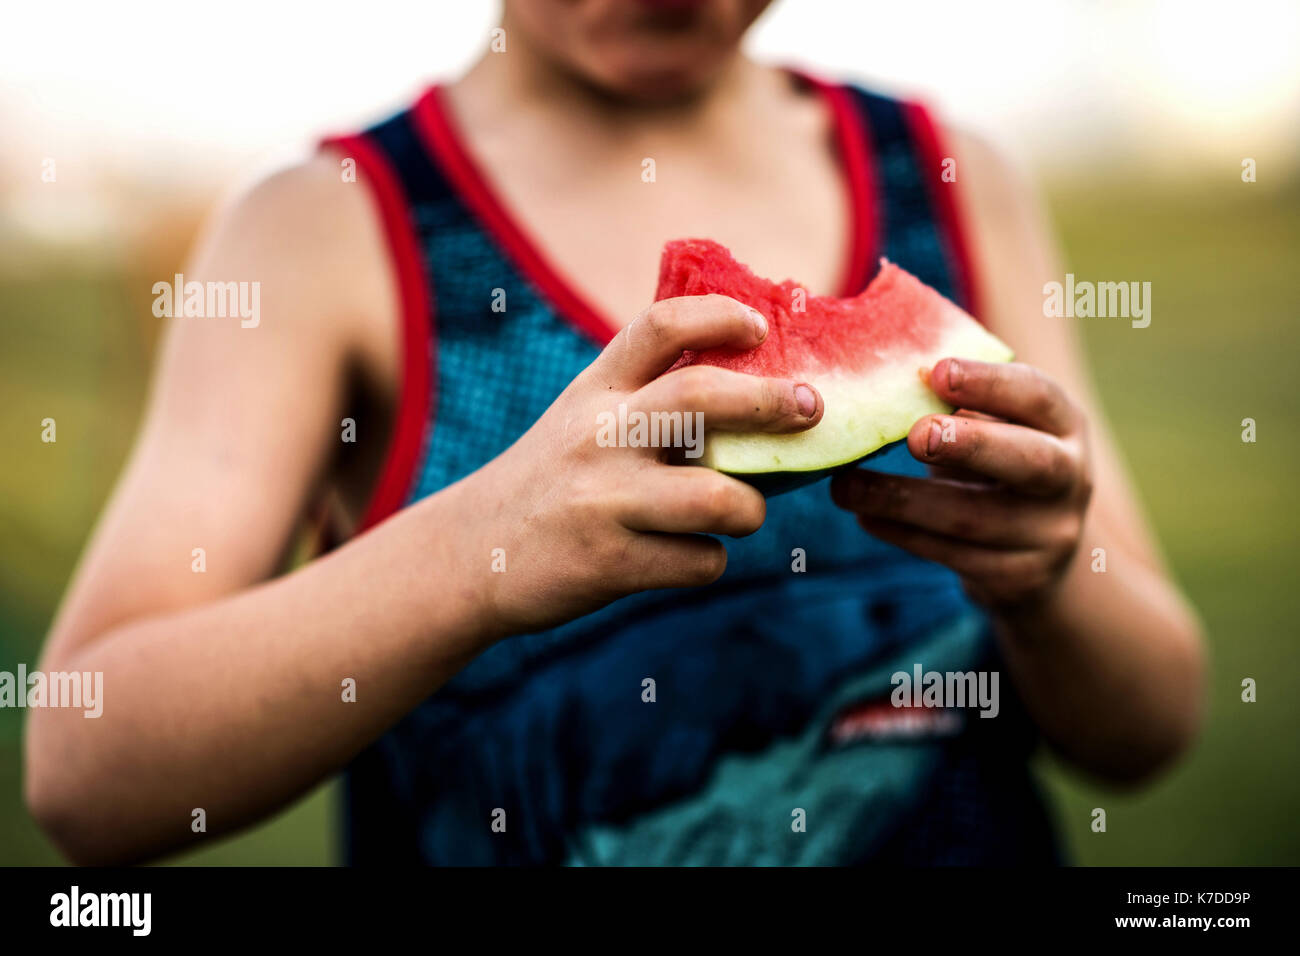 Midsection of boy eating watermelon Stock Photo